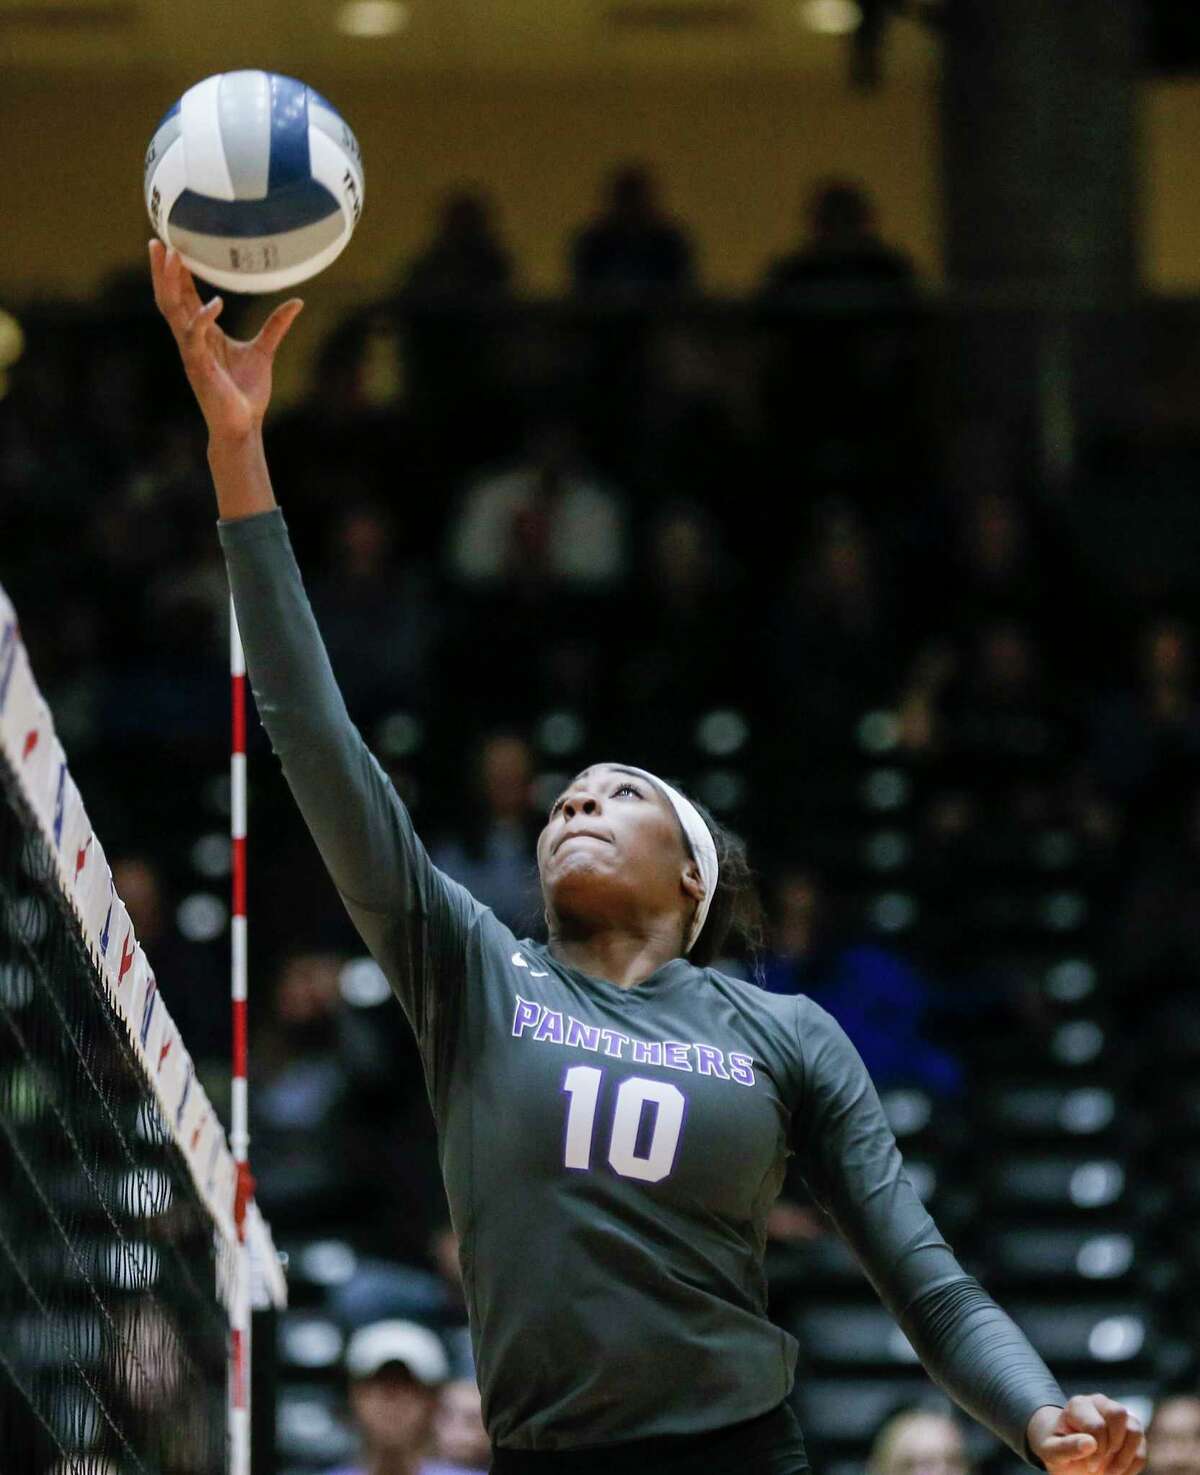 Ridge Point junior Reagan Rutherford hits the ball over the net during a Class 6A State Semifinal volleyball game against Plano West at the Curtis Culwell Center in Garland, Texas, Friday, November 16, 2018. Ridge Point won the match in four sets to advance to the State Finals. (Brandon Wade/Contributor)